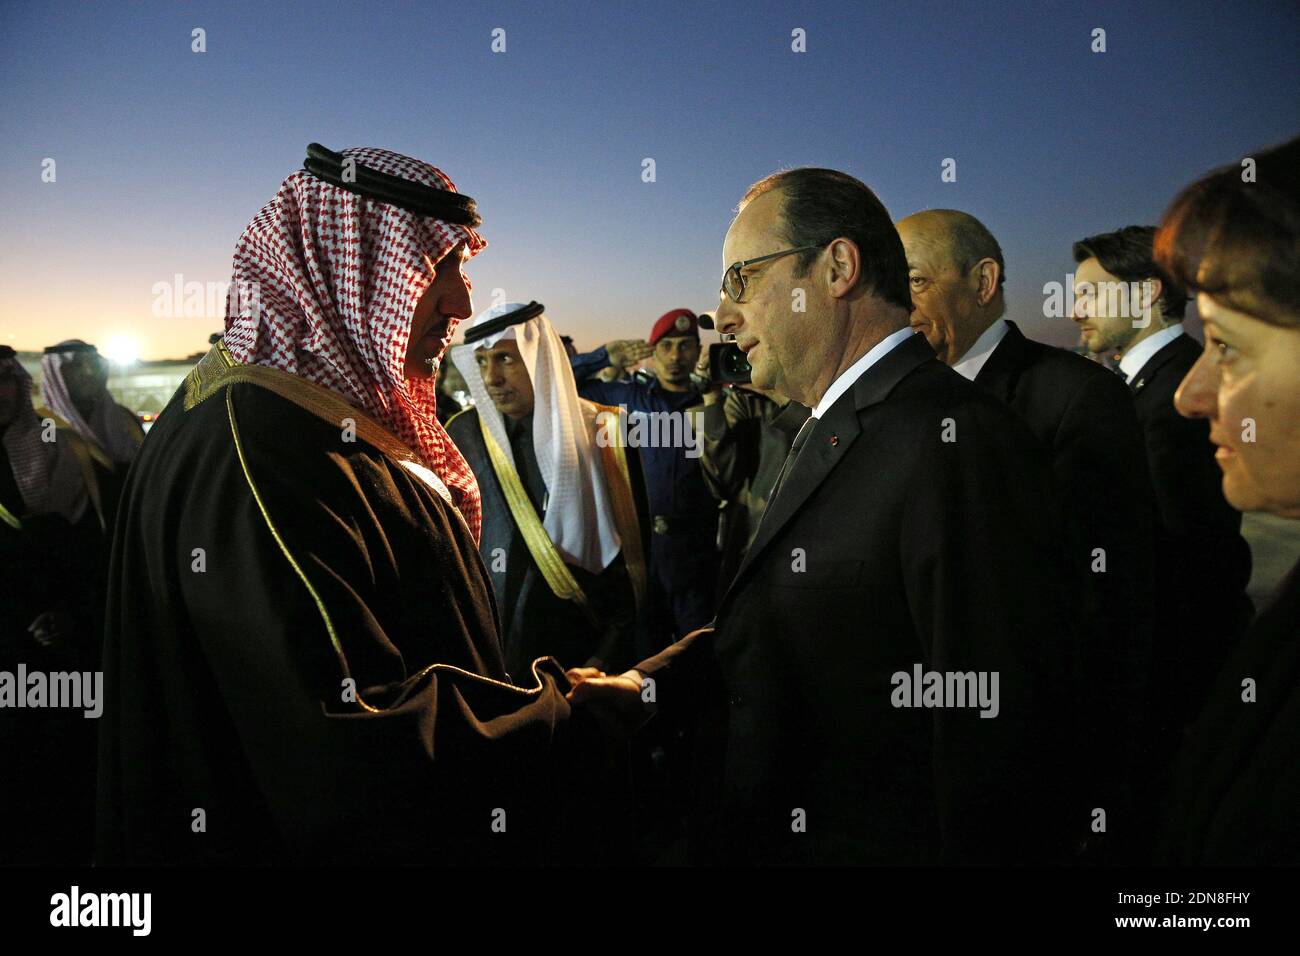 French President Francois Hollande (R) is welcomed by the Governor of the Riyadh Province, Turki bin Abdullah al-Saud (L) upon his arrival at Riyadh airport on January 24, 2015. World leaders headed to Saudi Arabia on January 24 to offer condolences following the death of King Abdullah. Photo Pool by Yoan Valat/ABACAPRESS.COM Stock Photo